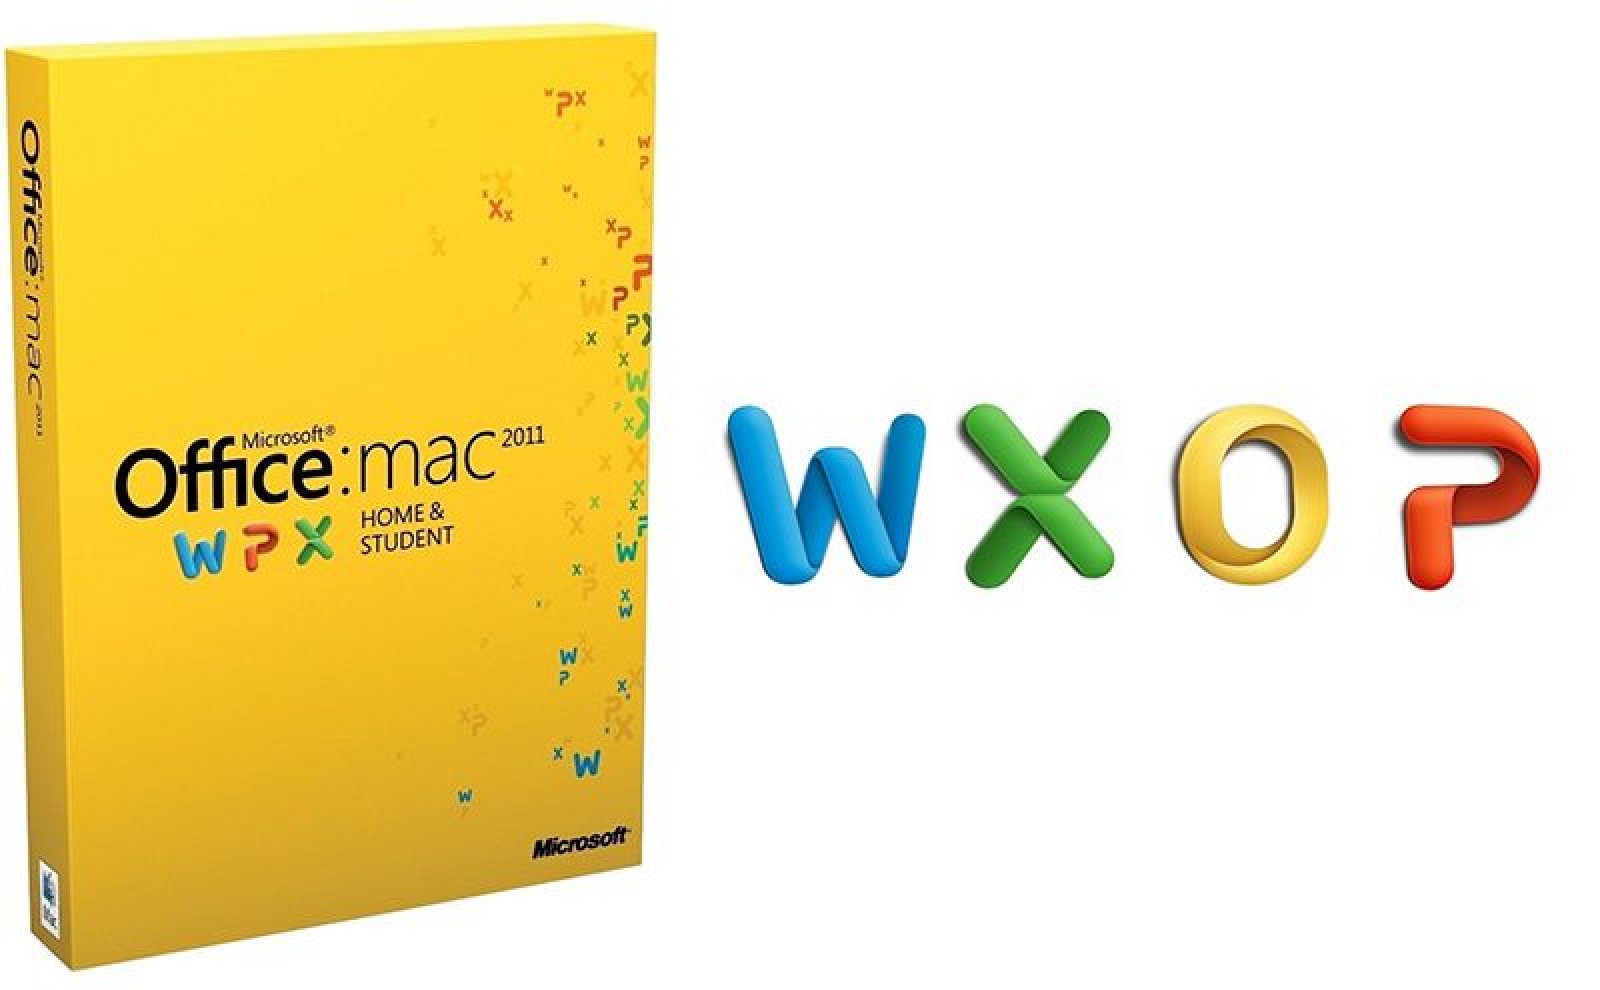 Will The Micrsoft Office For Mac